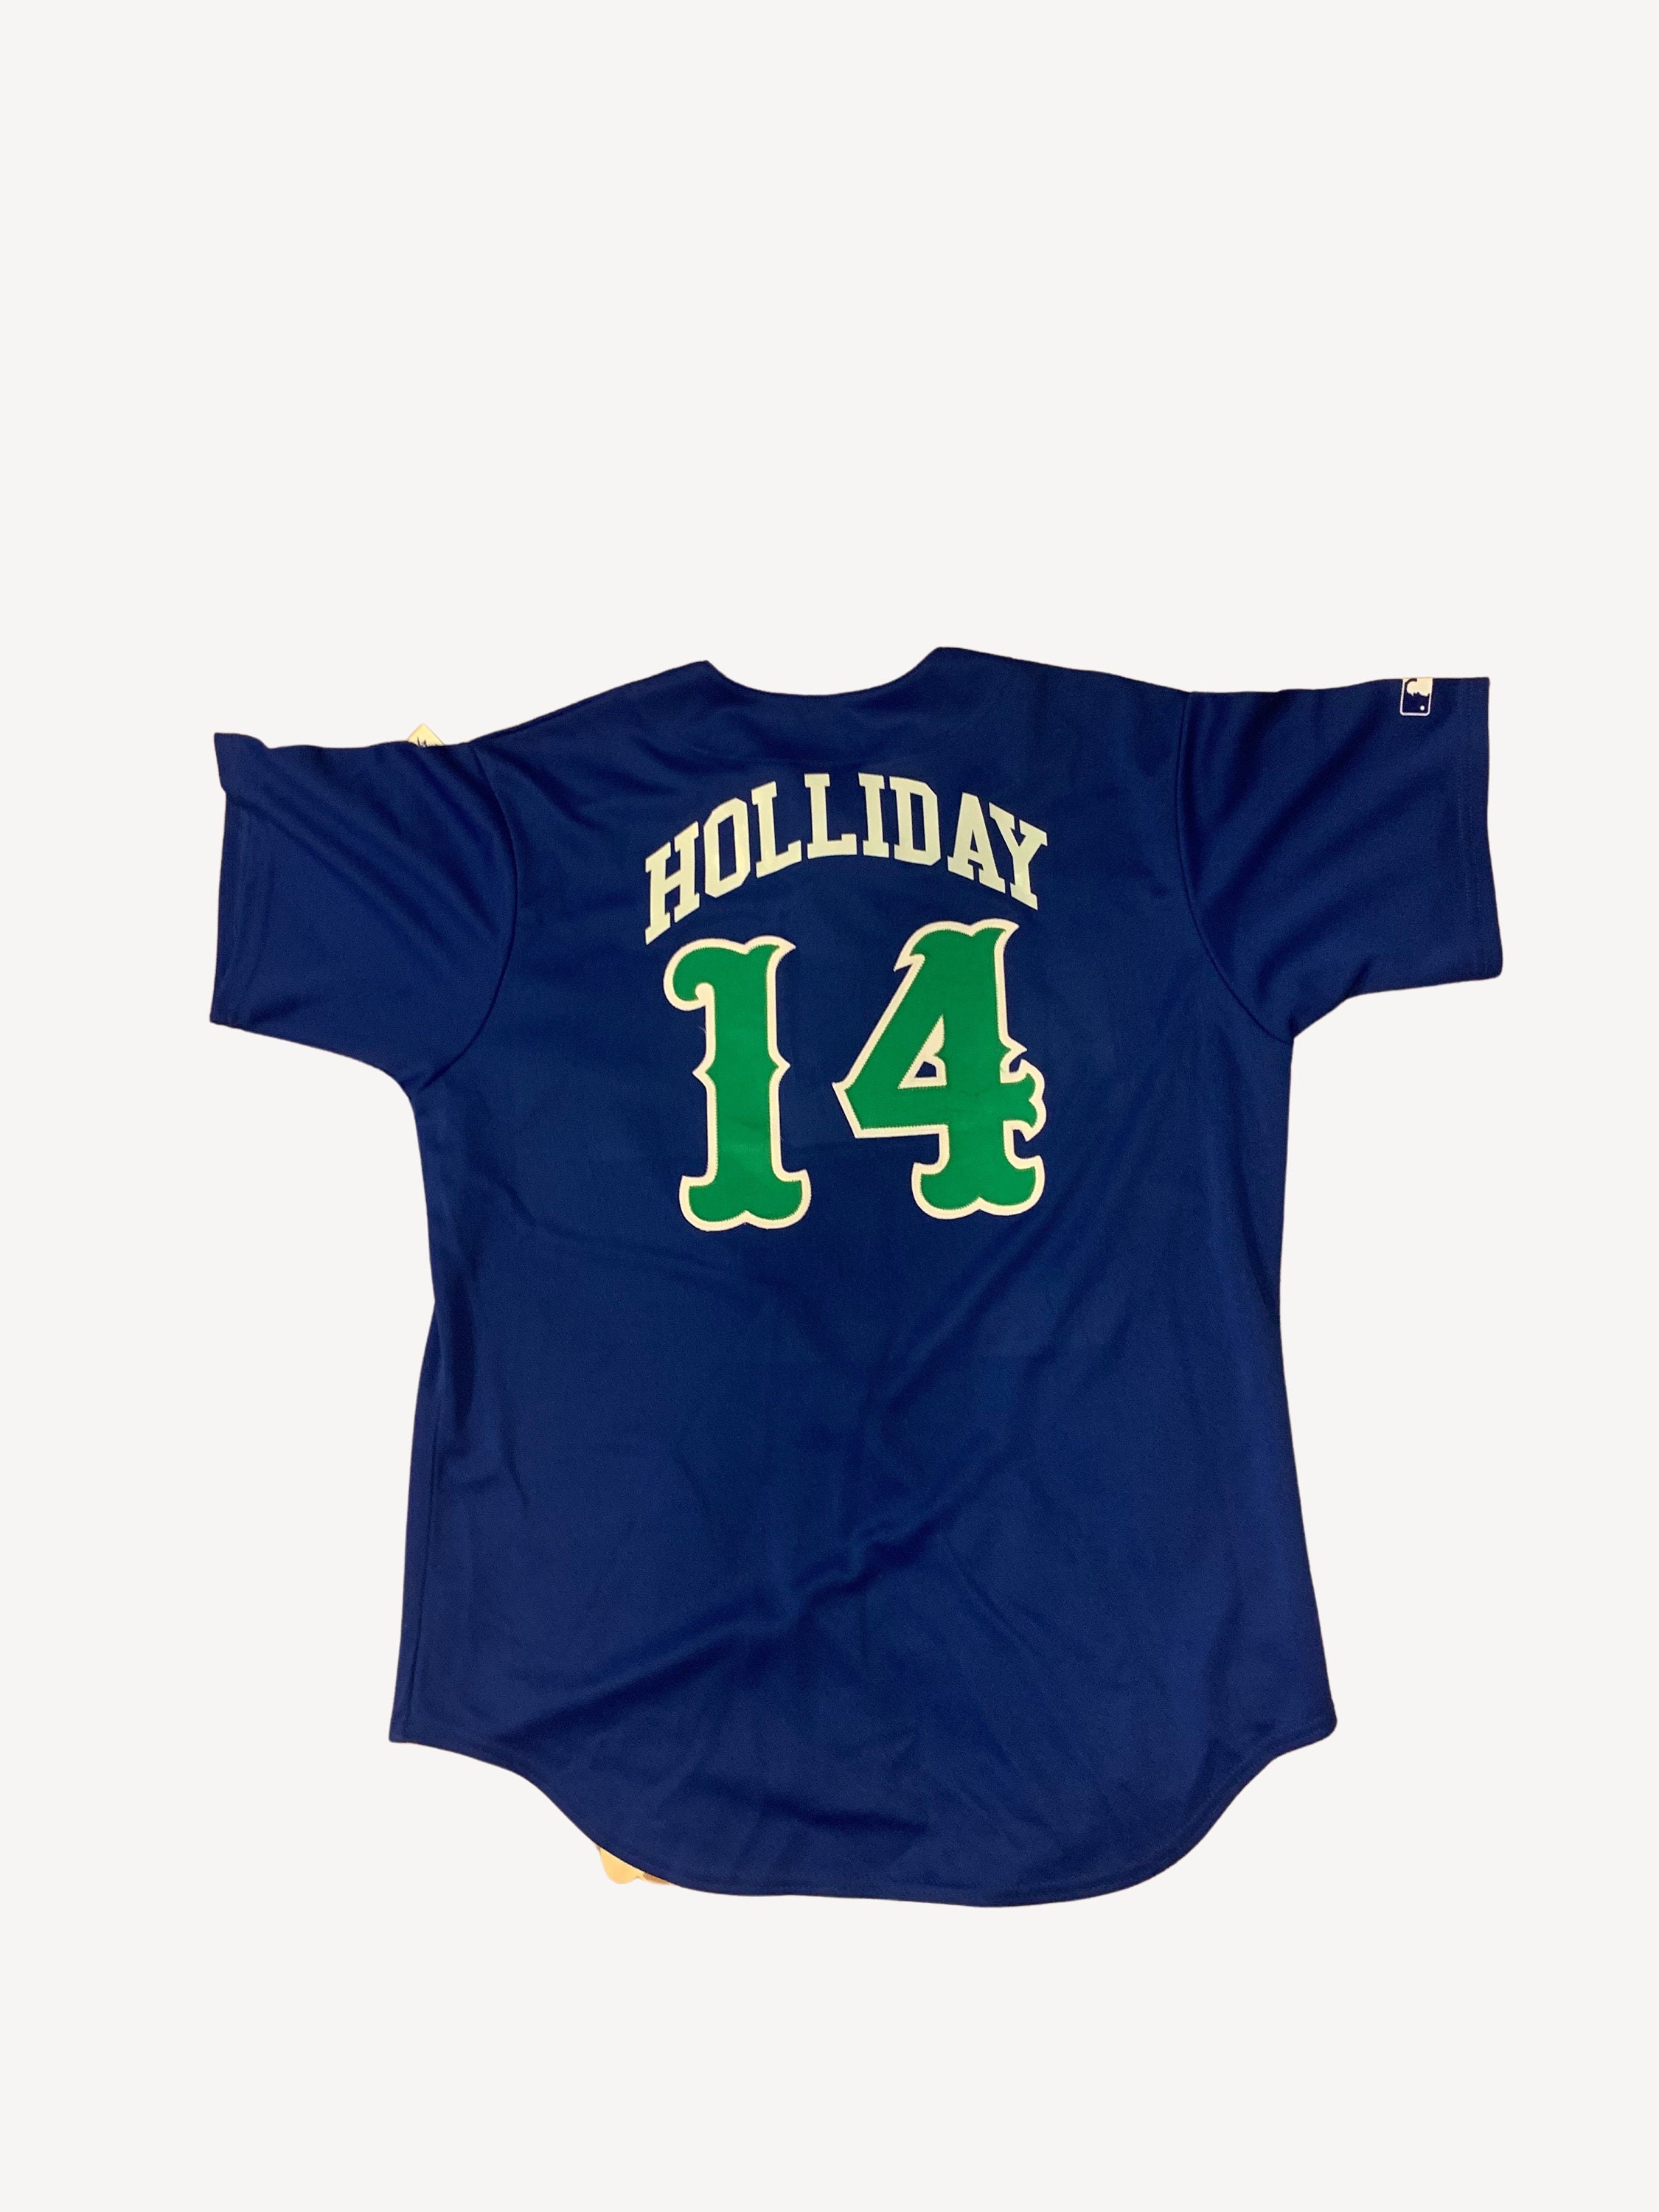 Vintage Baseball Jersey - Cannons Blue and Green Holliday #14 Sports Jersey, Retro Majestic Style, Casual Button Up Jersey